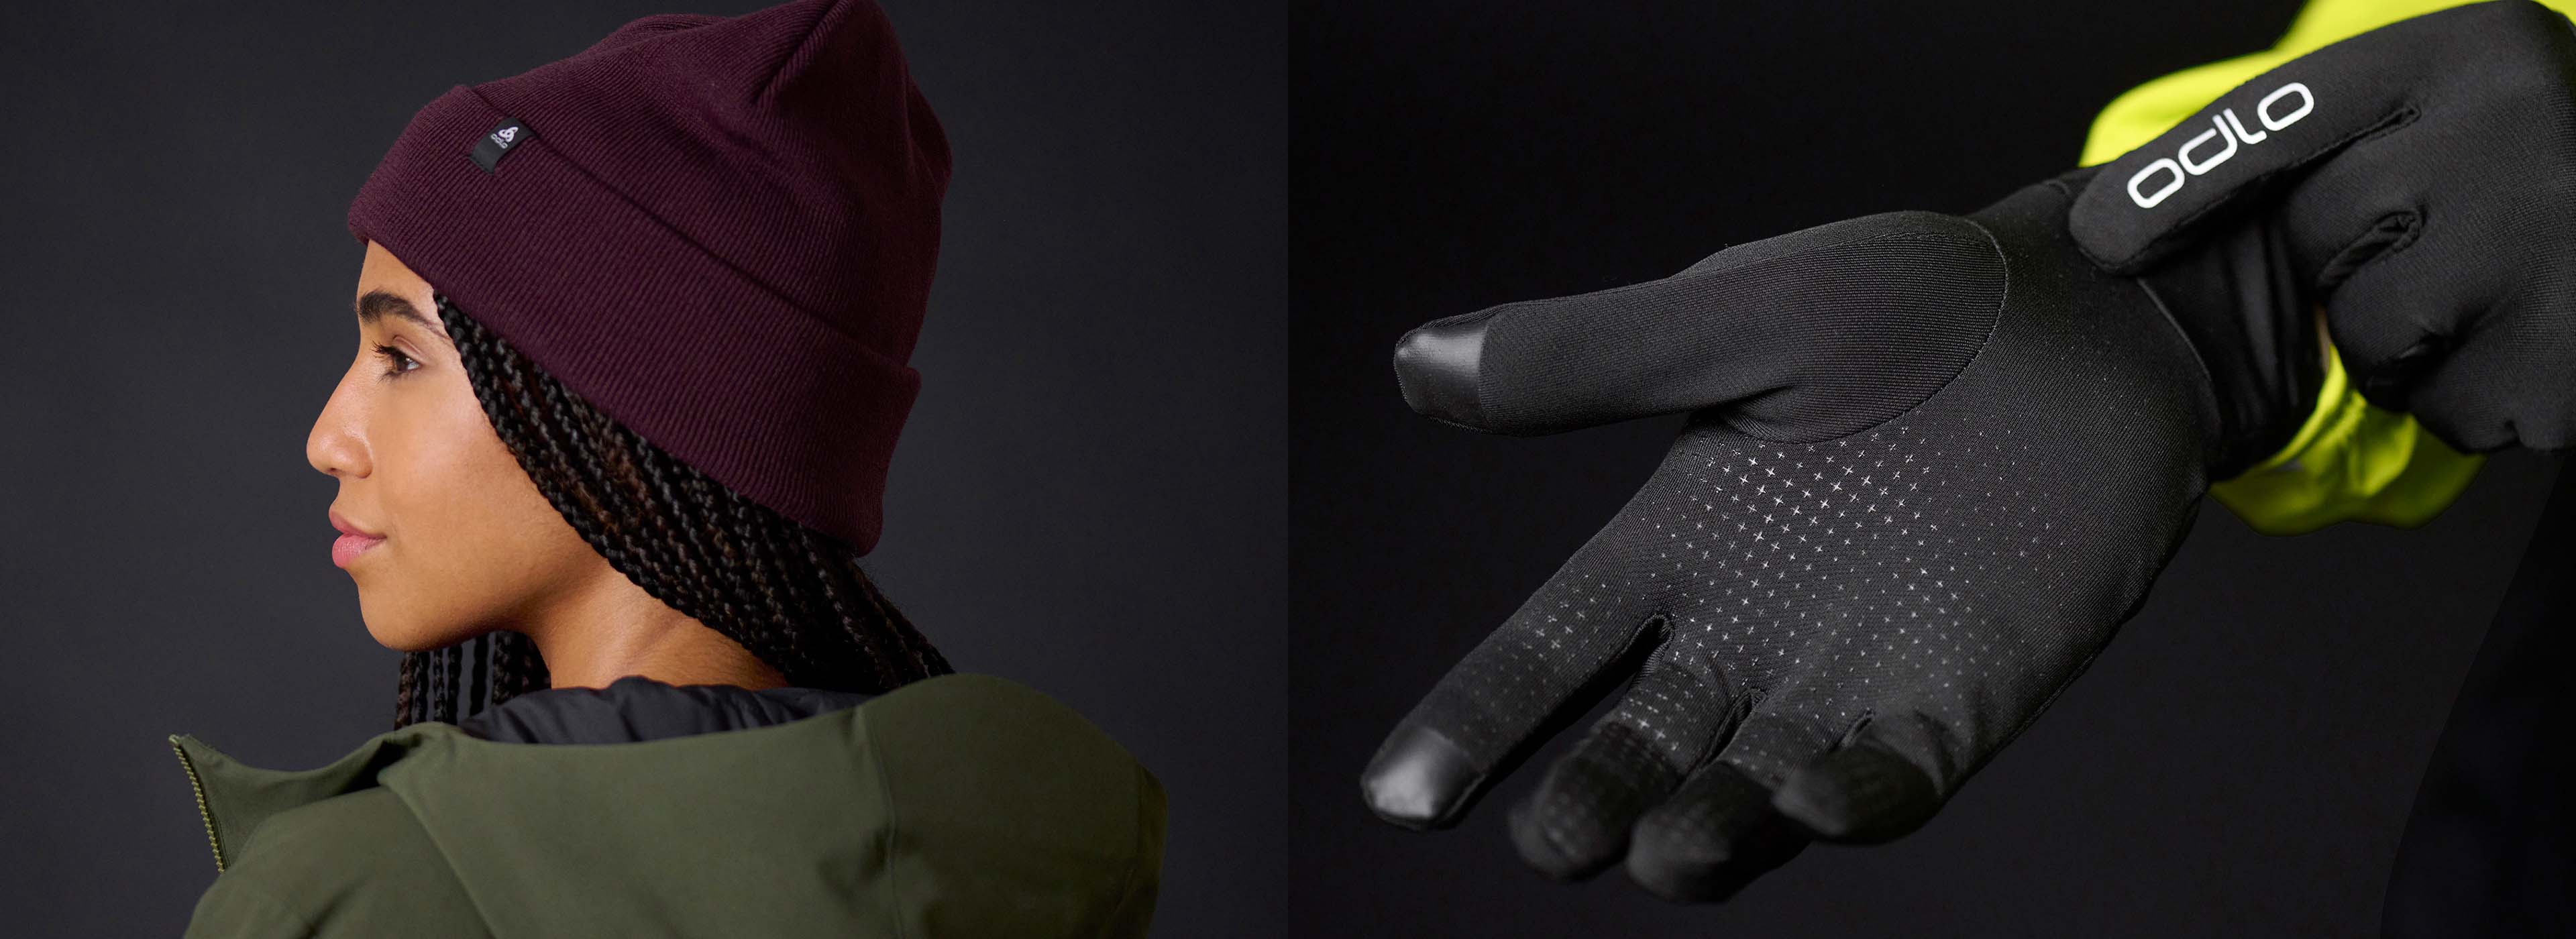 New headwear and gloves collection Fall Winter 2021